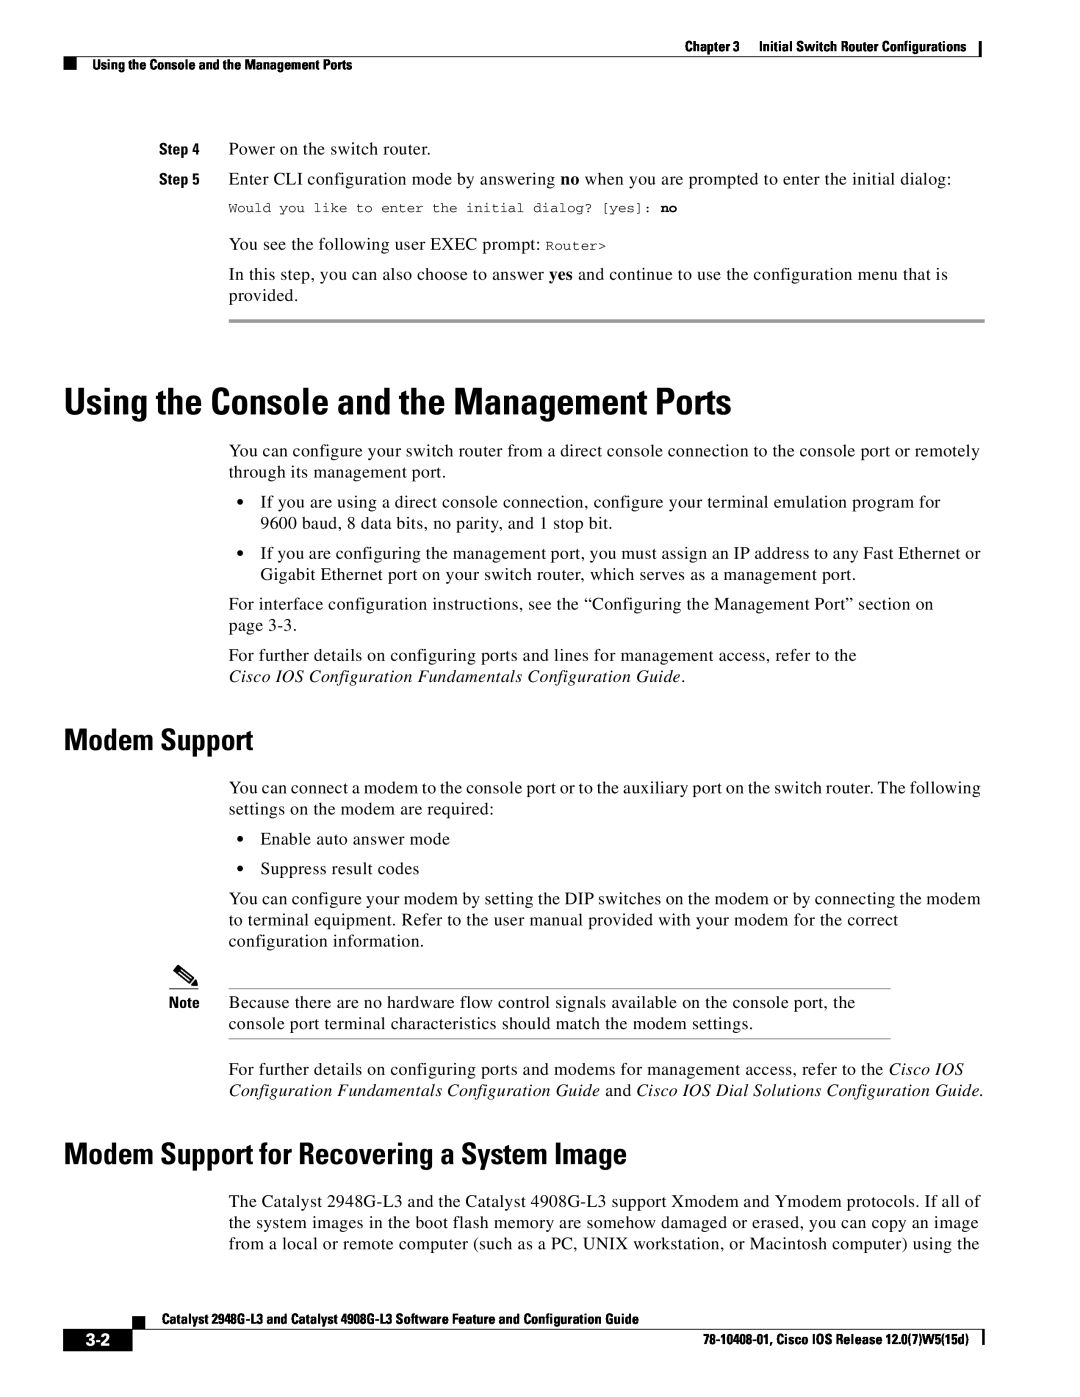 Cisco Systems 3 manual Using the Console and the Management Ports, Modem Support for Recovering a System Image 